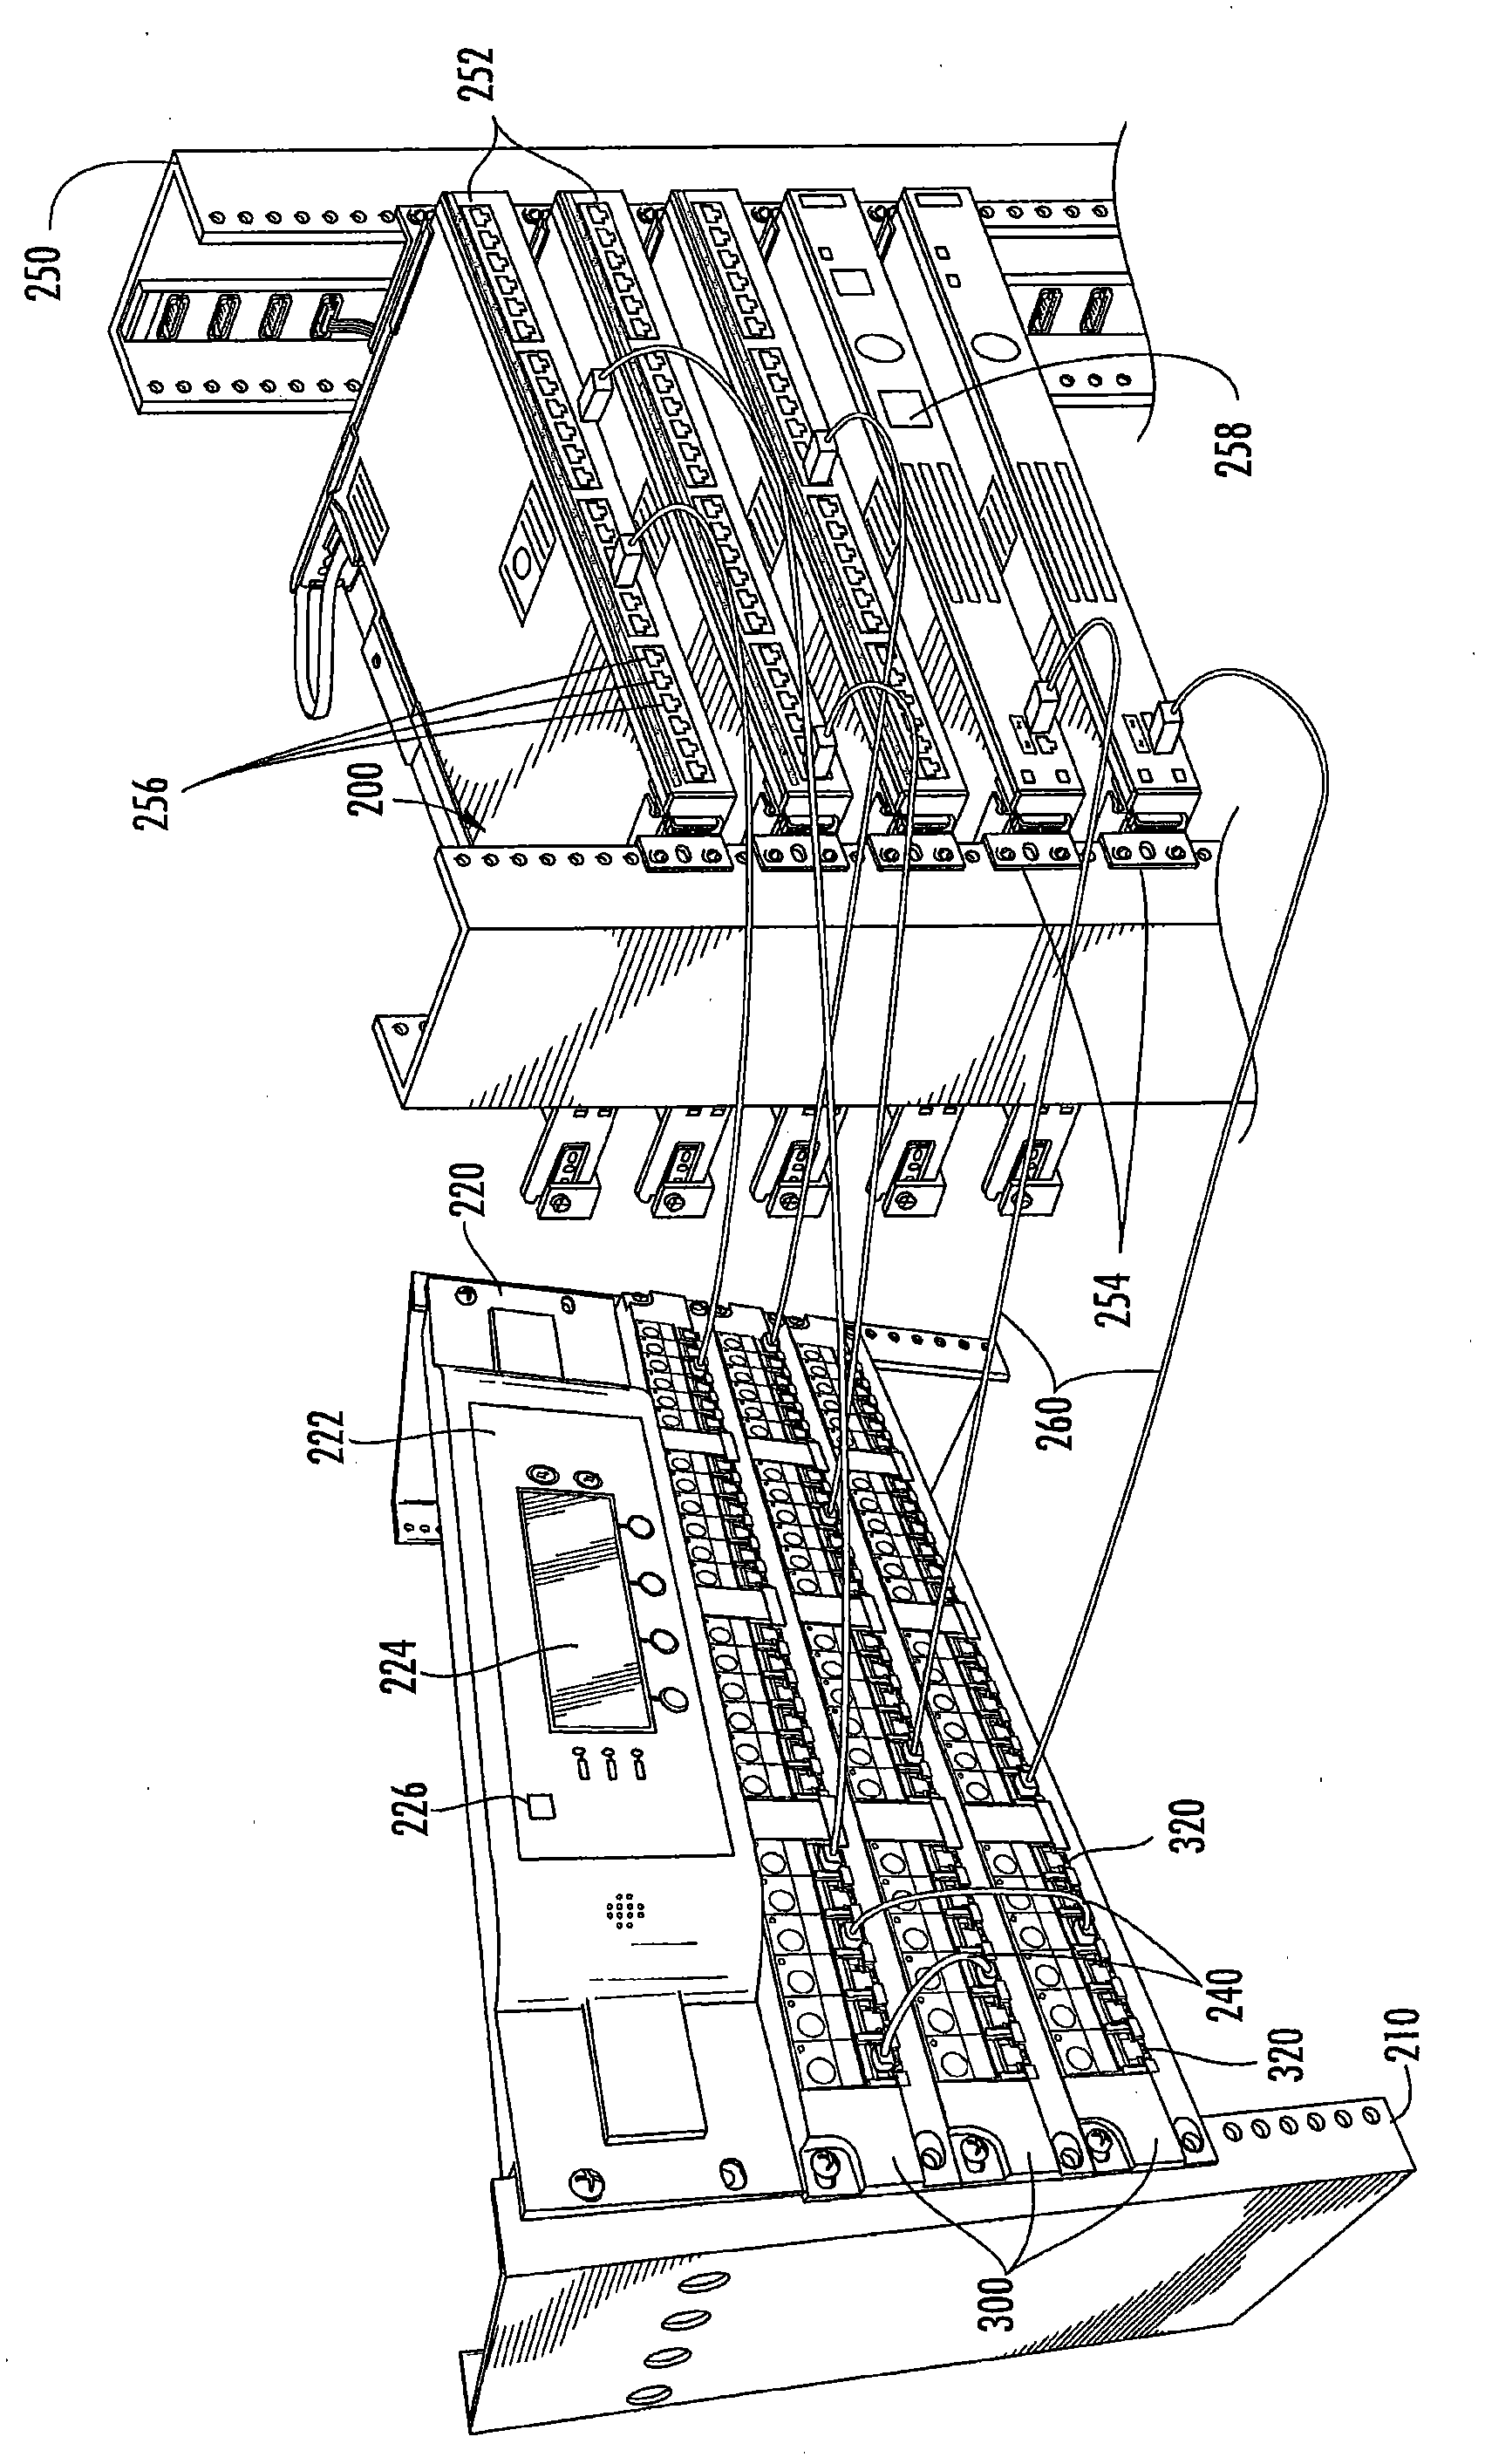 Systems for automatically tracking patching connections to network devices using a separate control channel and related patching equipment and methods